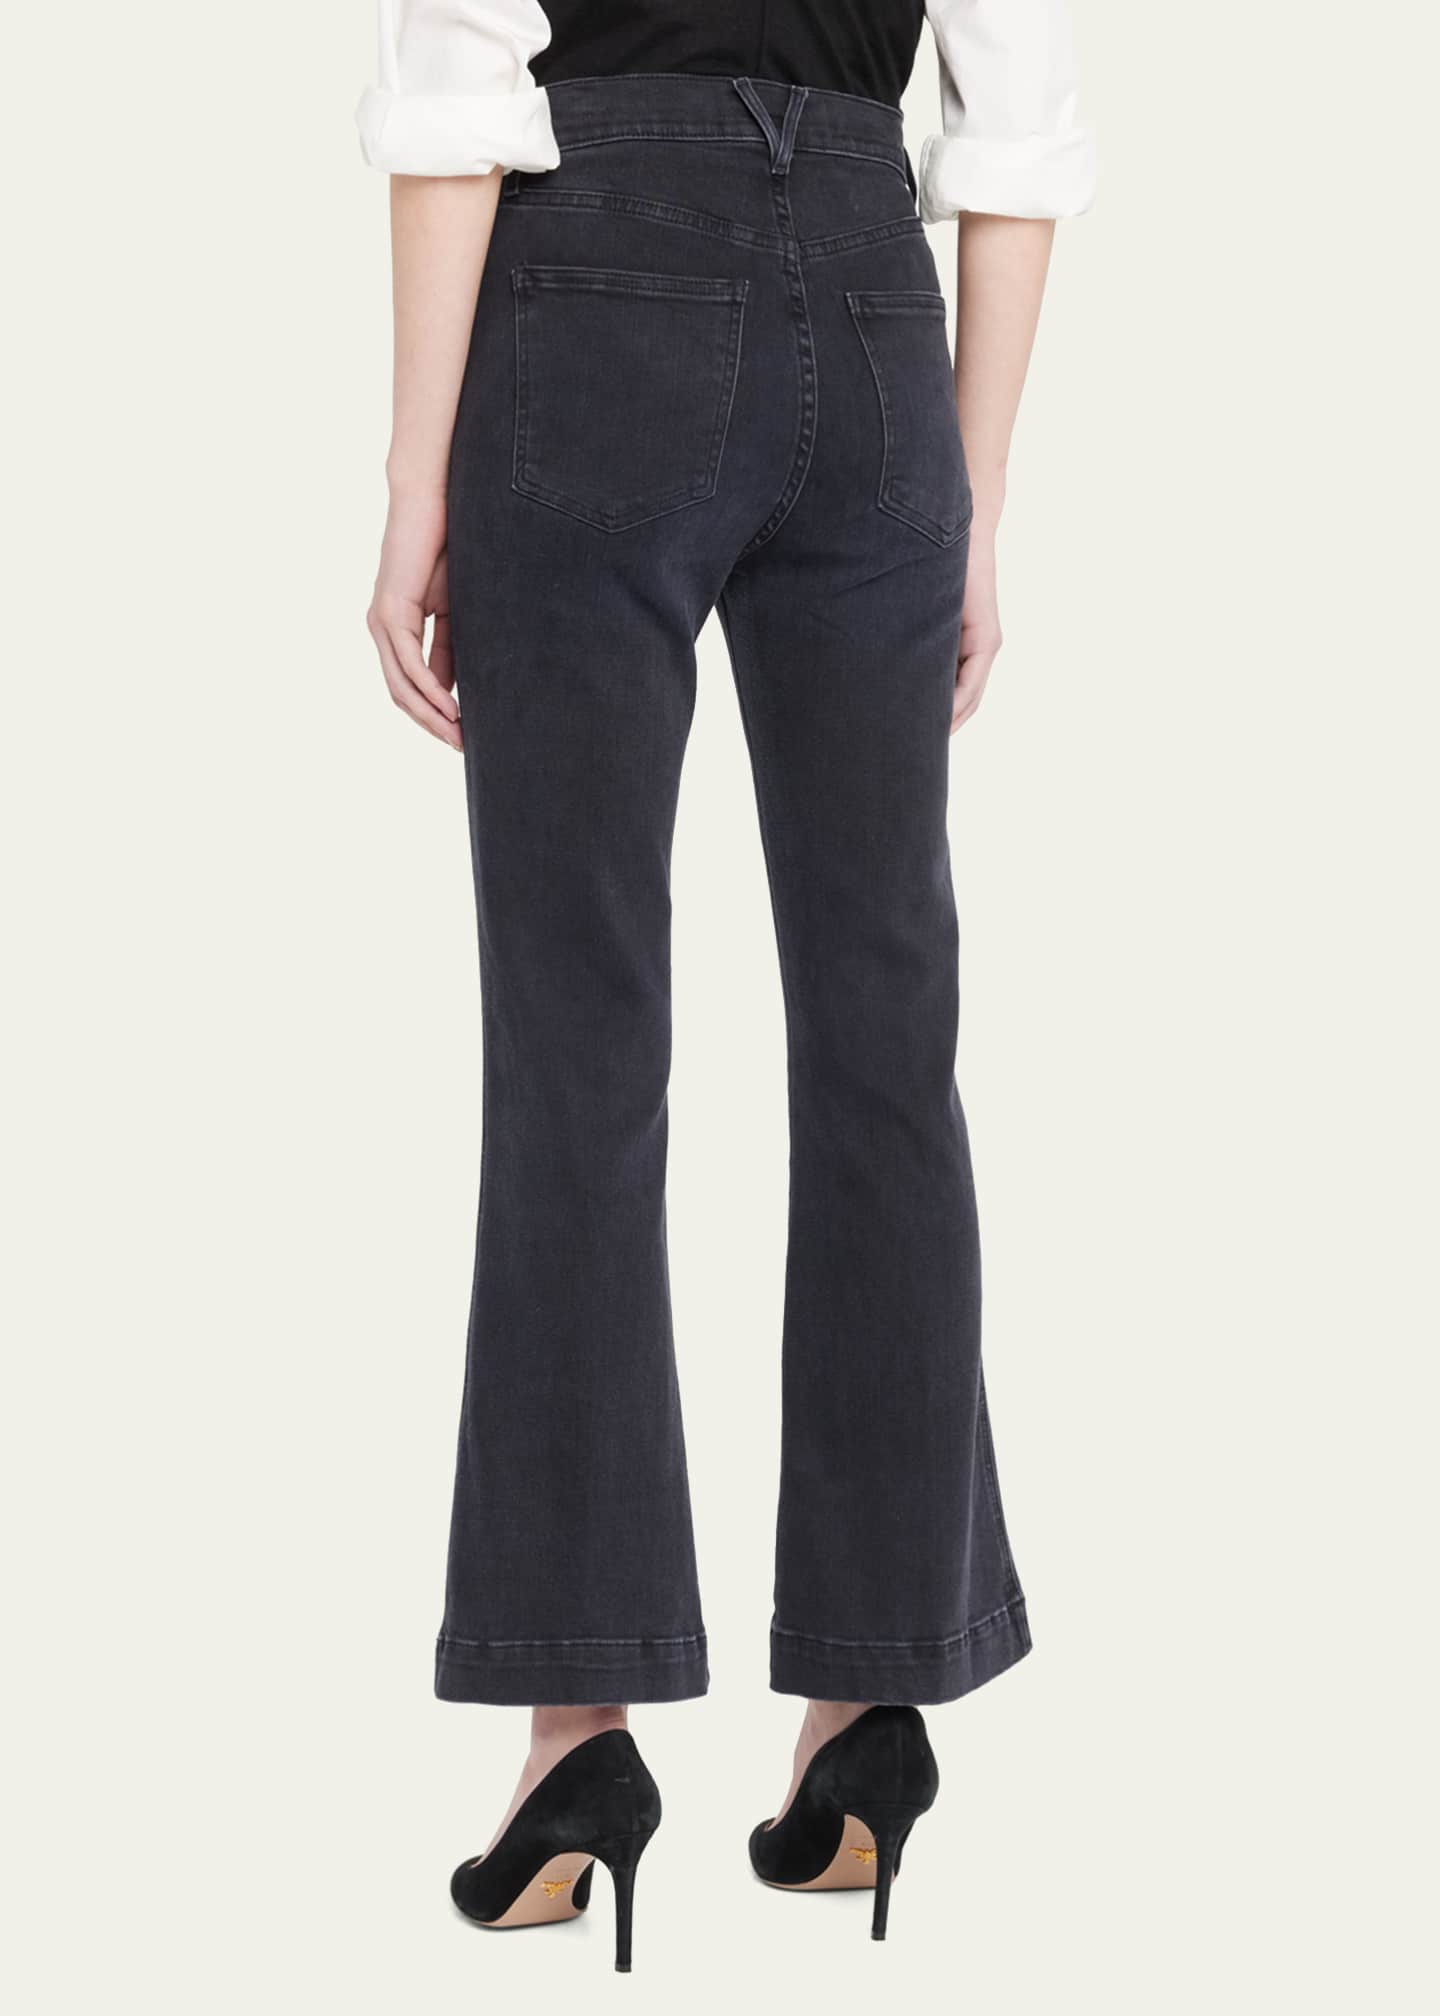 Veronica Beard Jeans Carson High-Rise Ankle Flare Jeans - Bergdorf Goodman